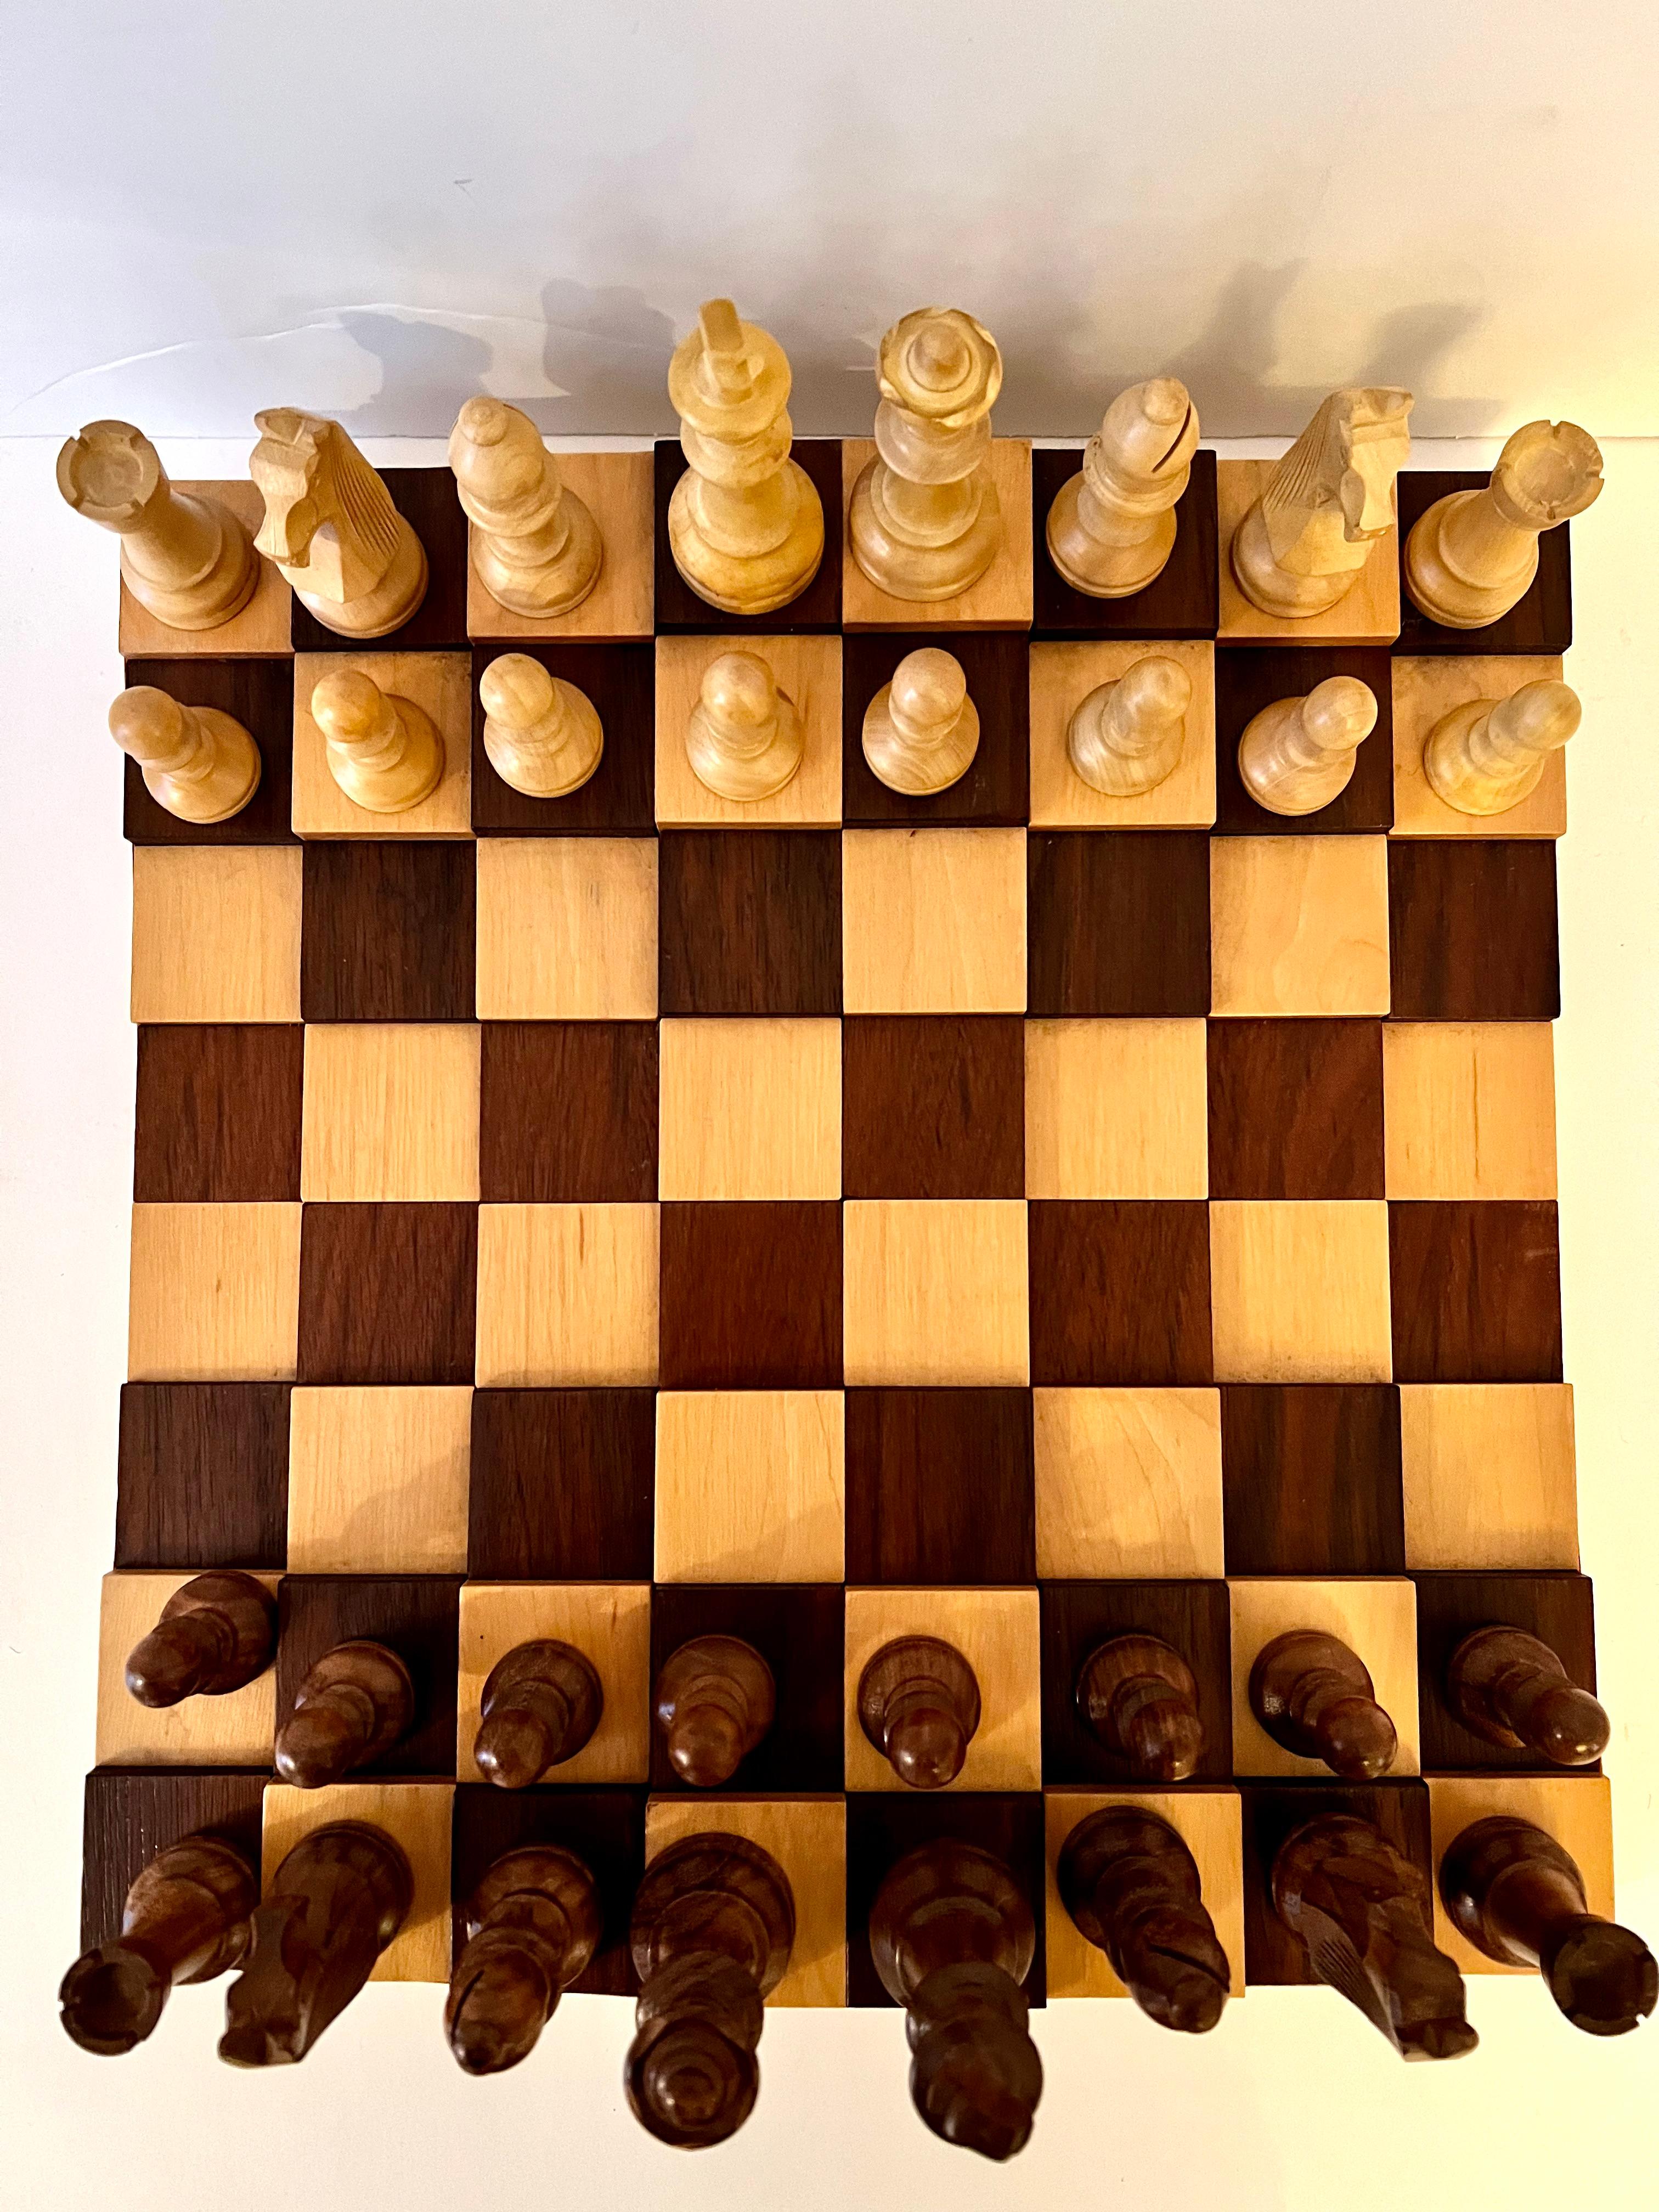 Modern 3 Dimensional Wooden Chess or Checker Board with Chess Players For Sale